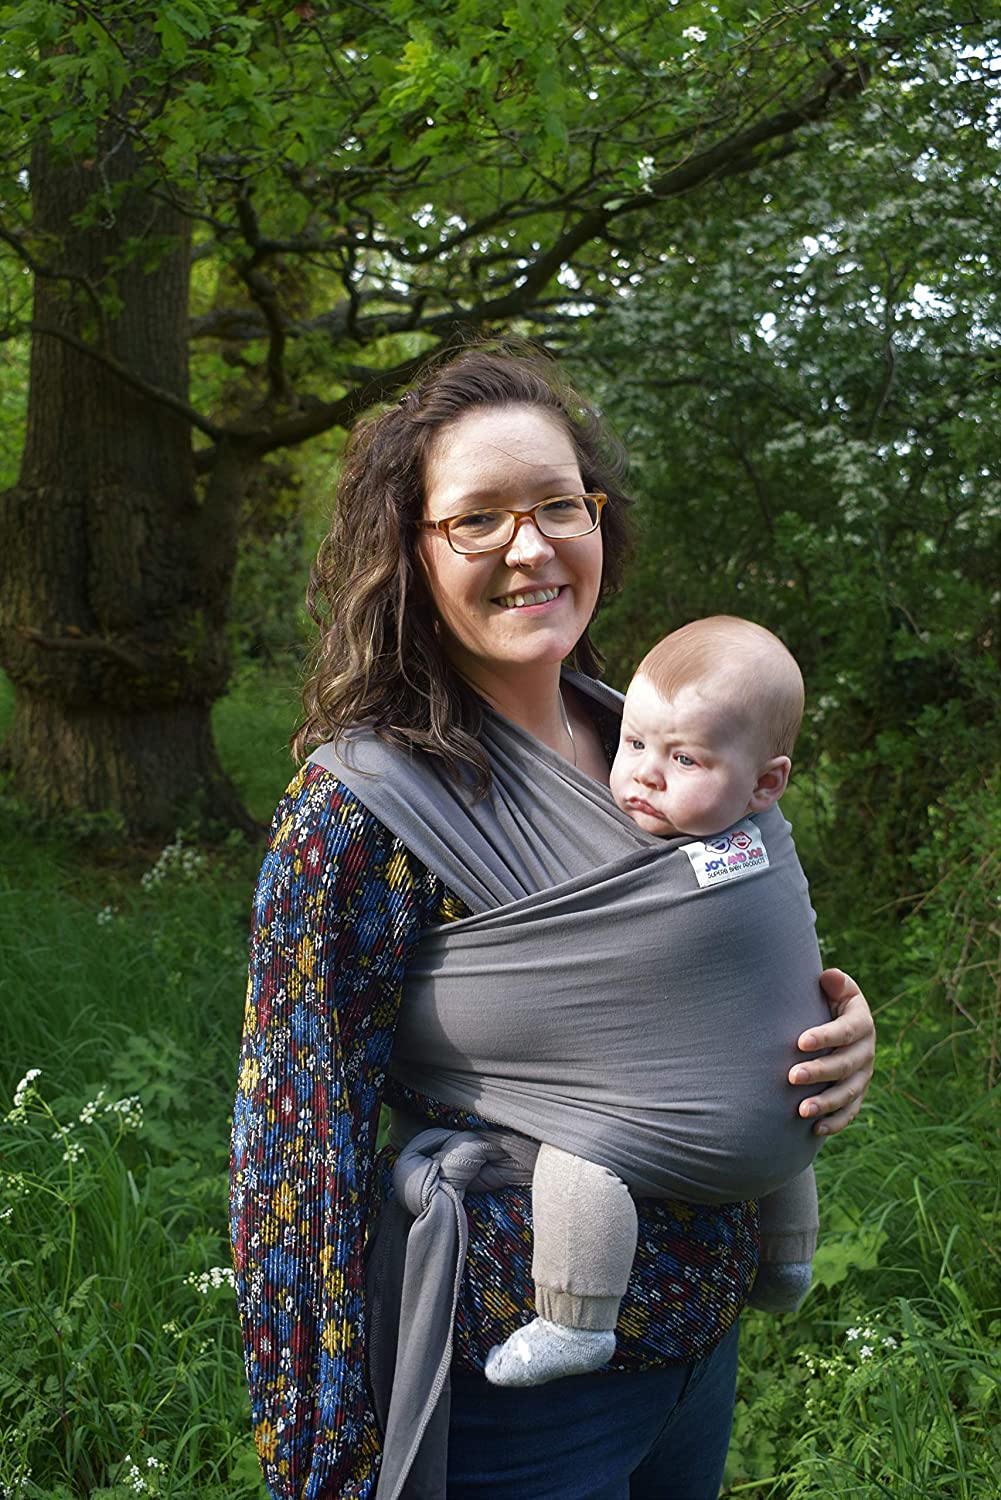 Bamboo Baby Sling | Made in the UK by Joy and Joe® | Bamboo Cotton Spandex | Organic Stretchy Wrap Carrier | UK/EU Safety Tested | Box with Hat